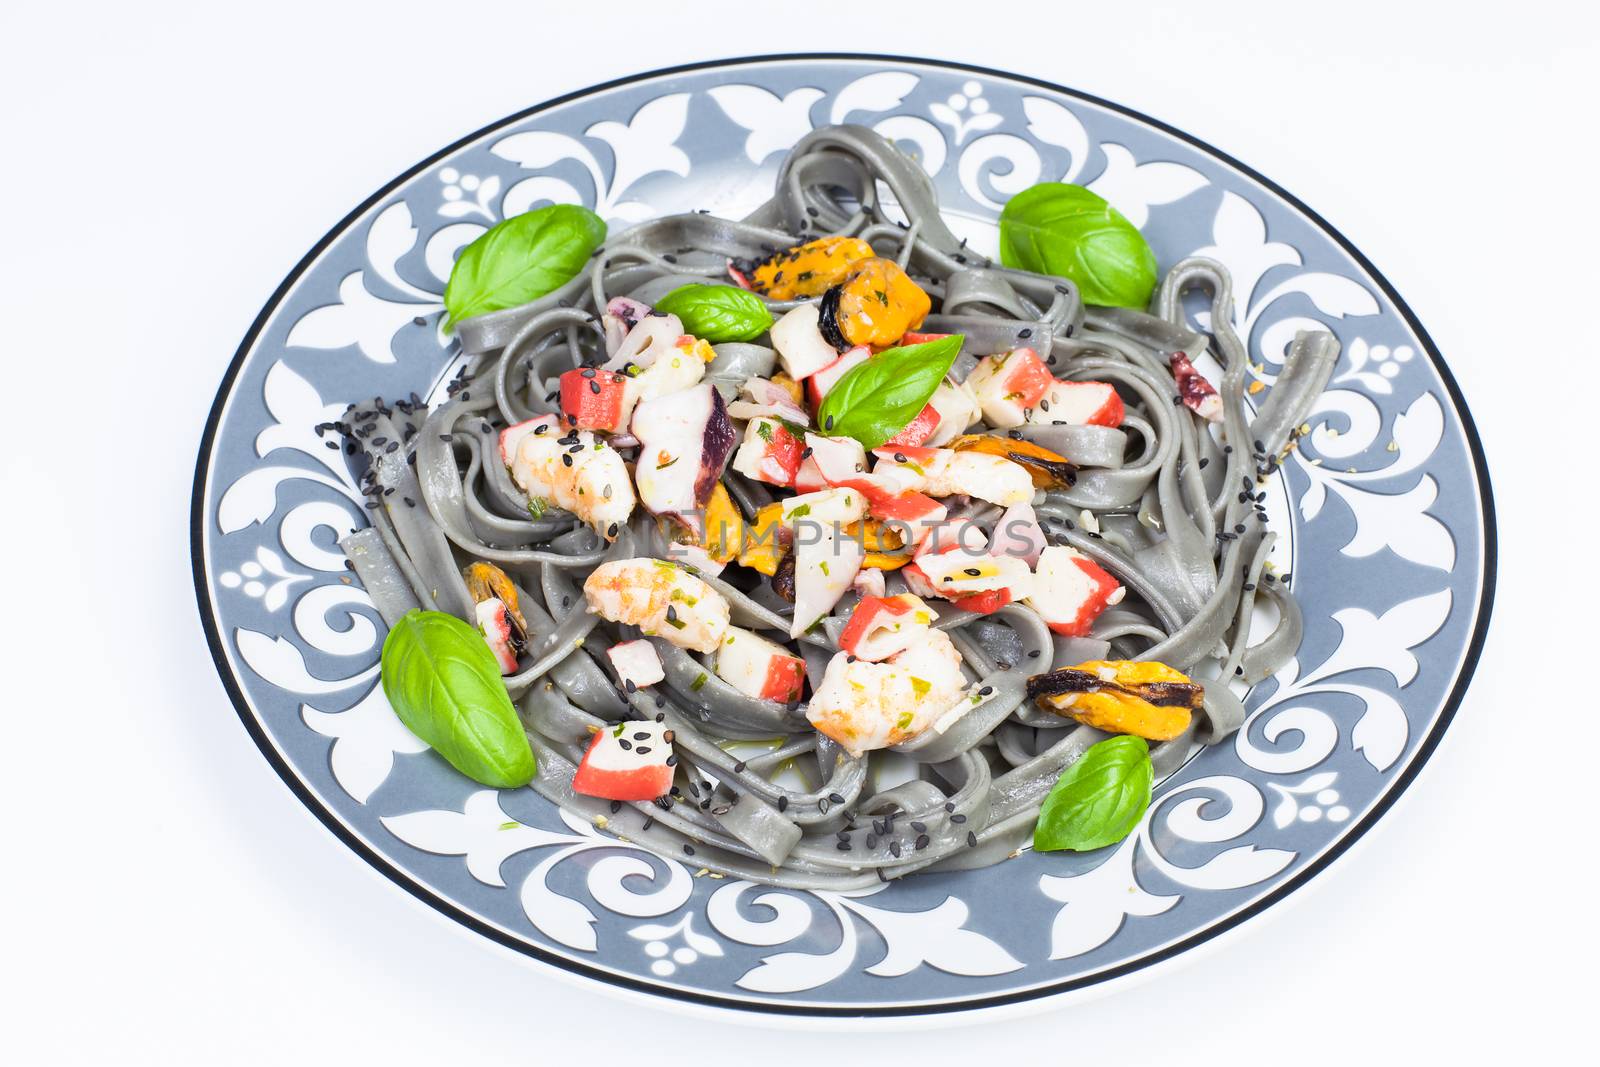 Black spaghetti with prawns and mussels garnished with basil leaf and black sesame